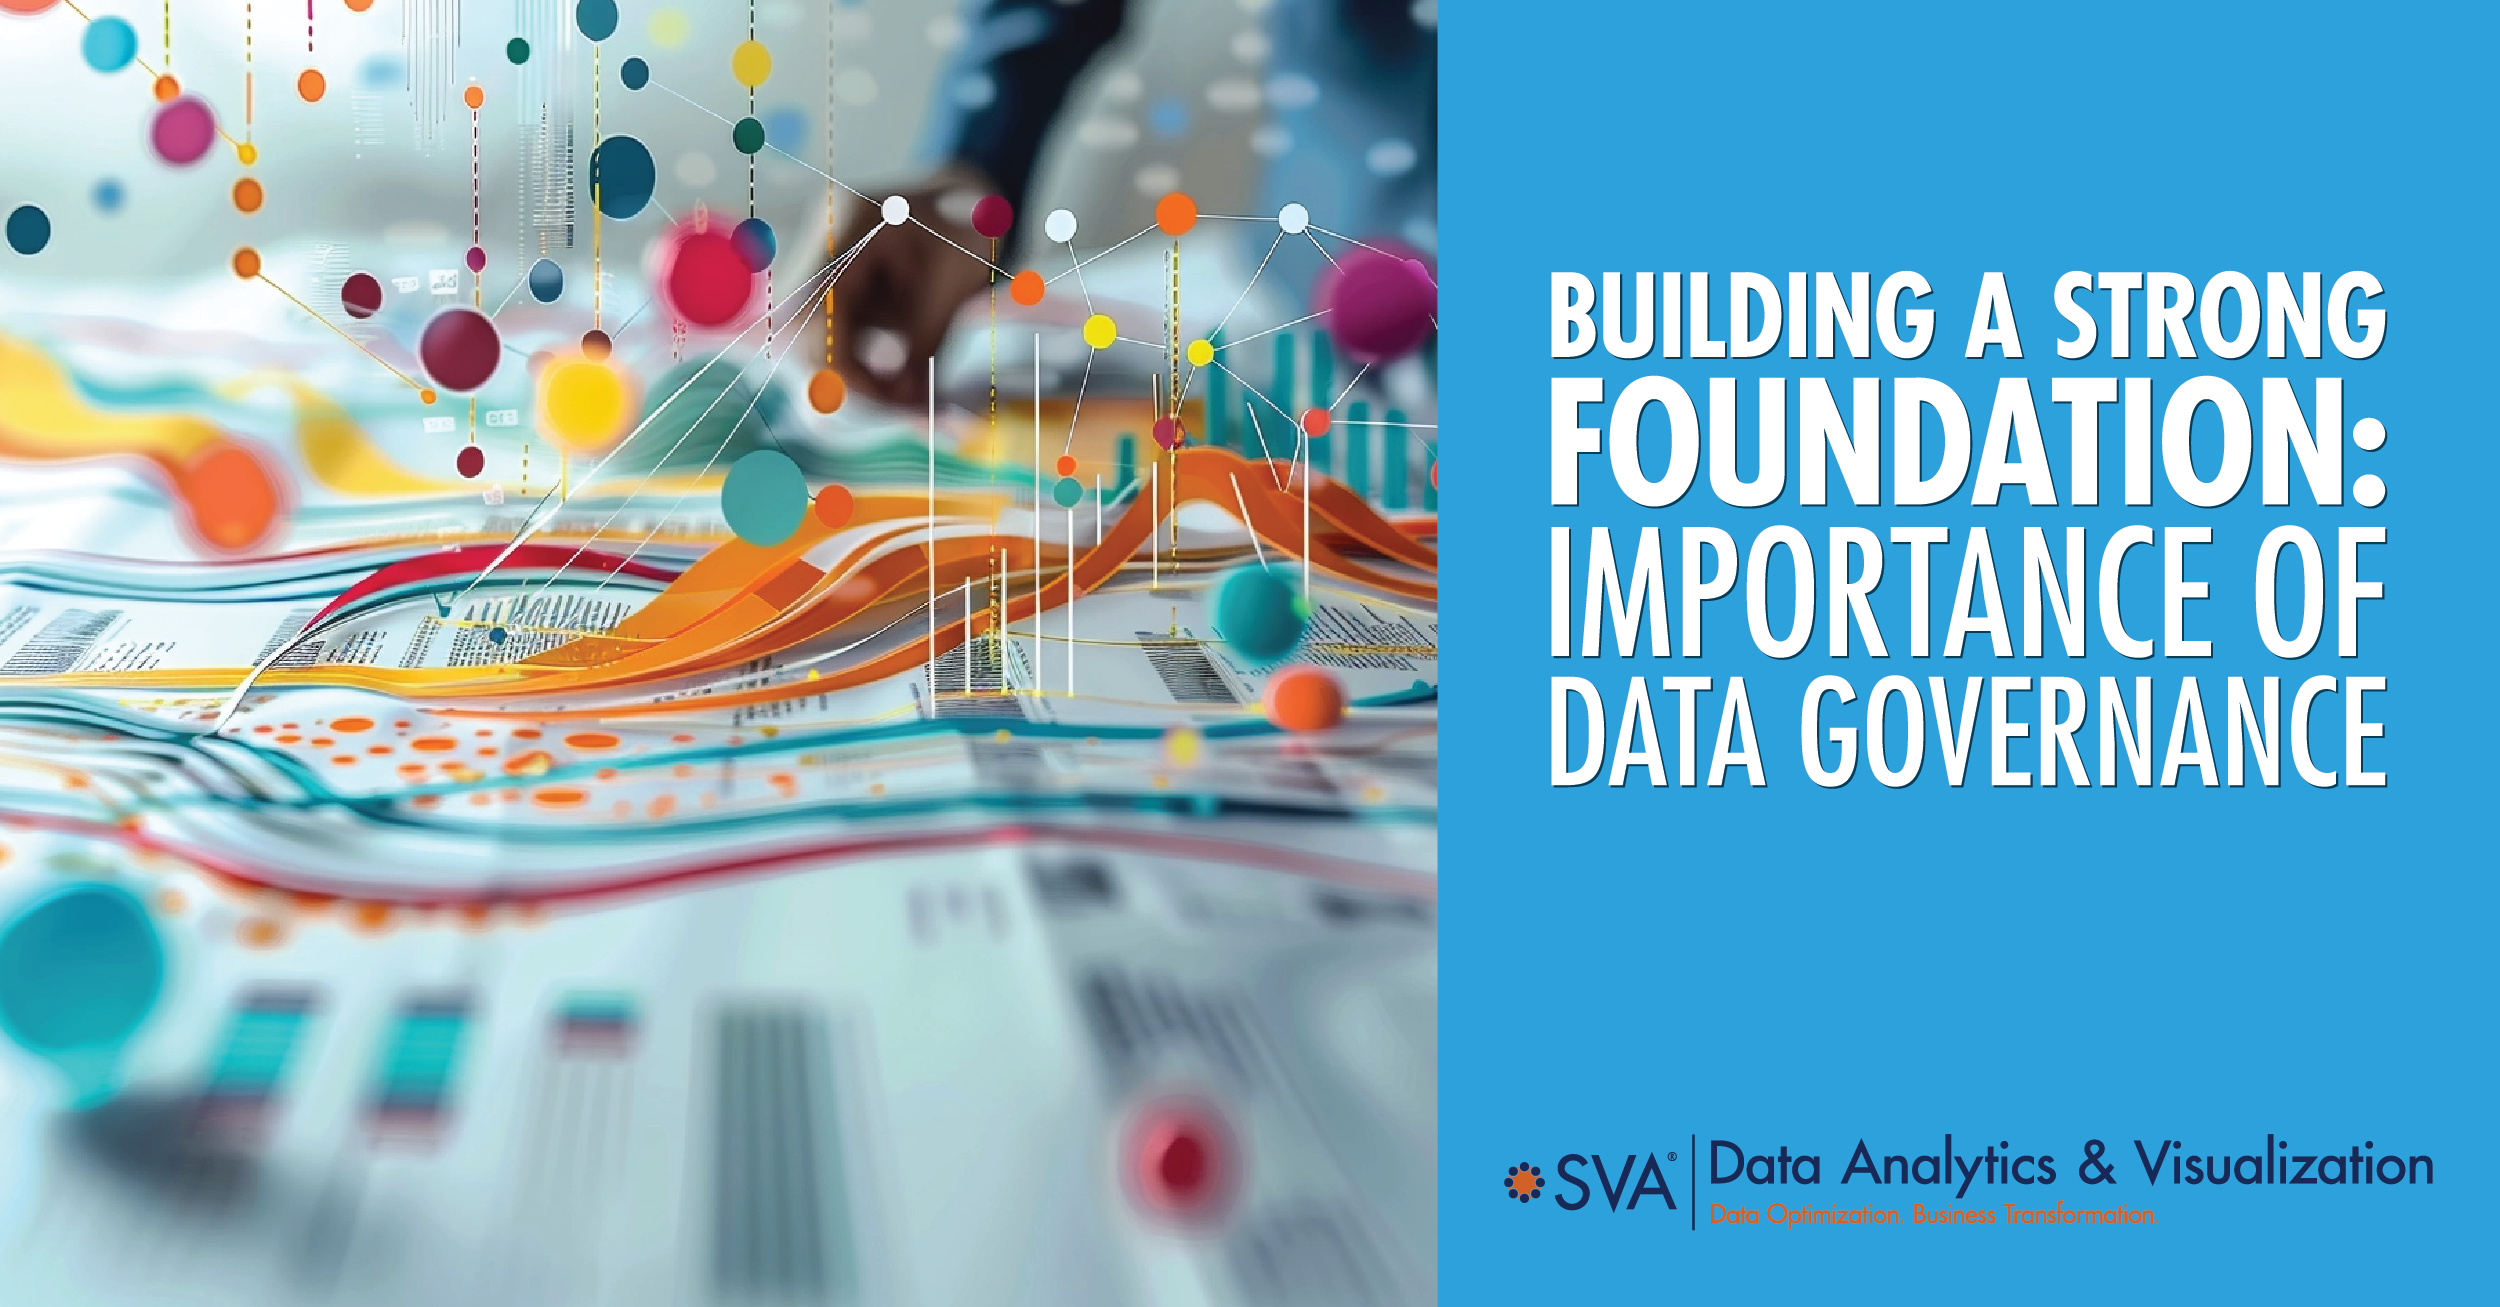 Data Governance: Importance in Building a Strong Foundation